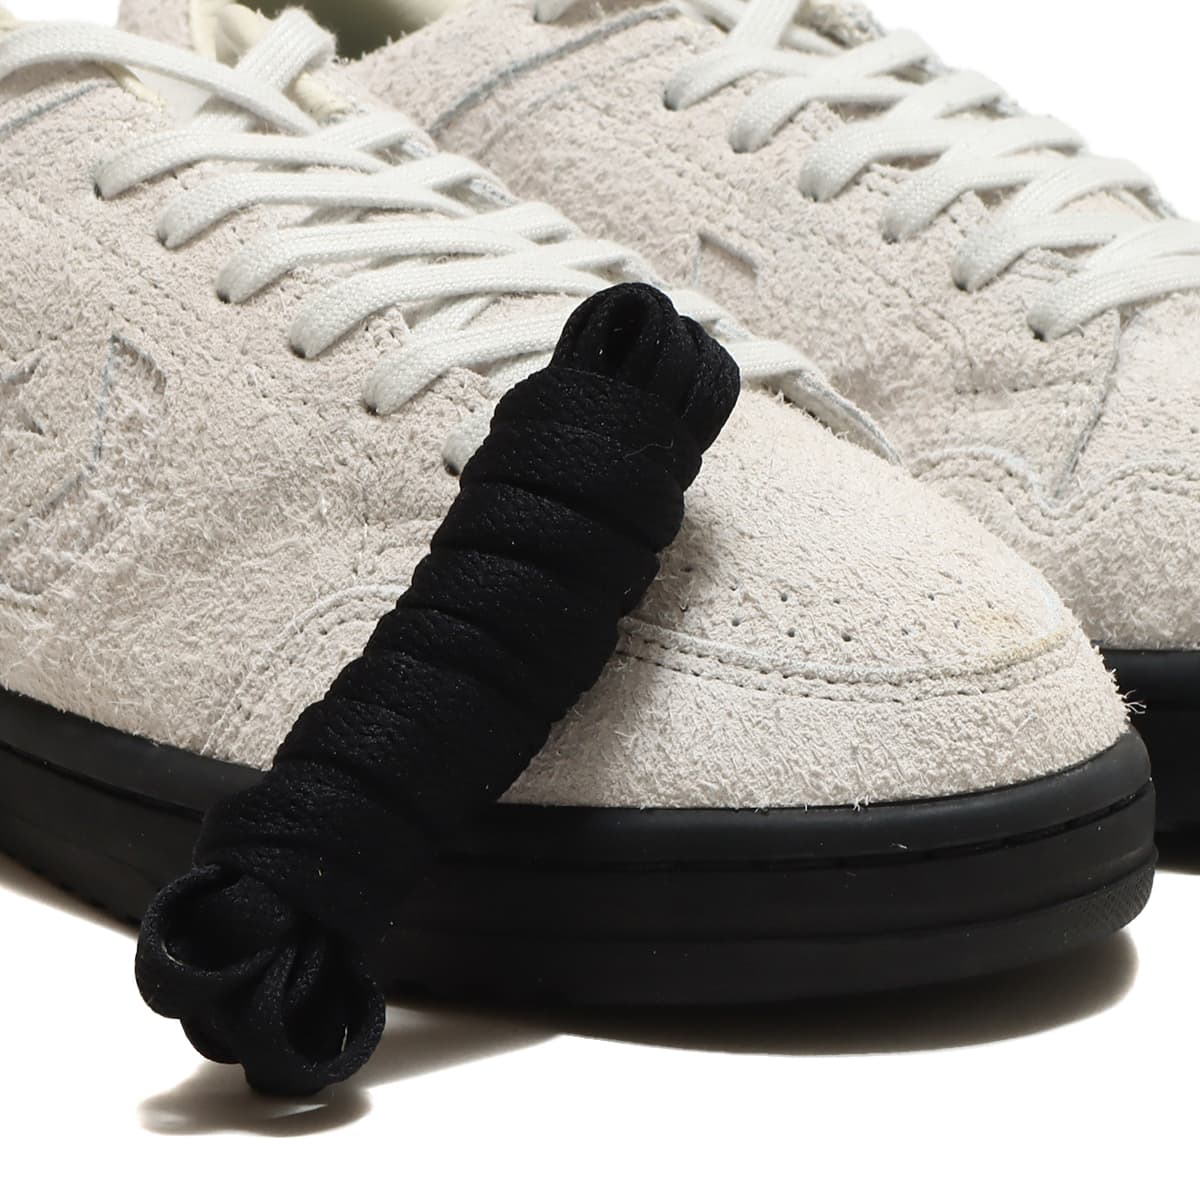 CONVERSE WEAPON SK OX + WHITE/BLACK 23SS-I